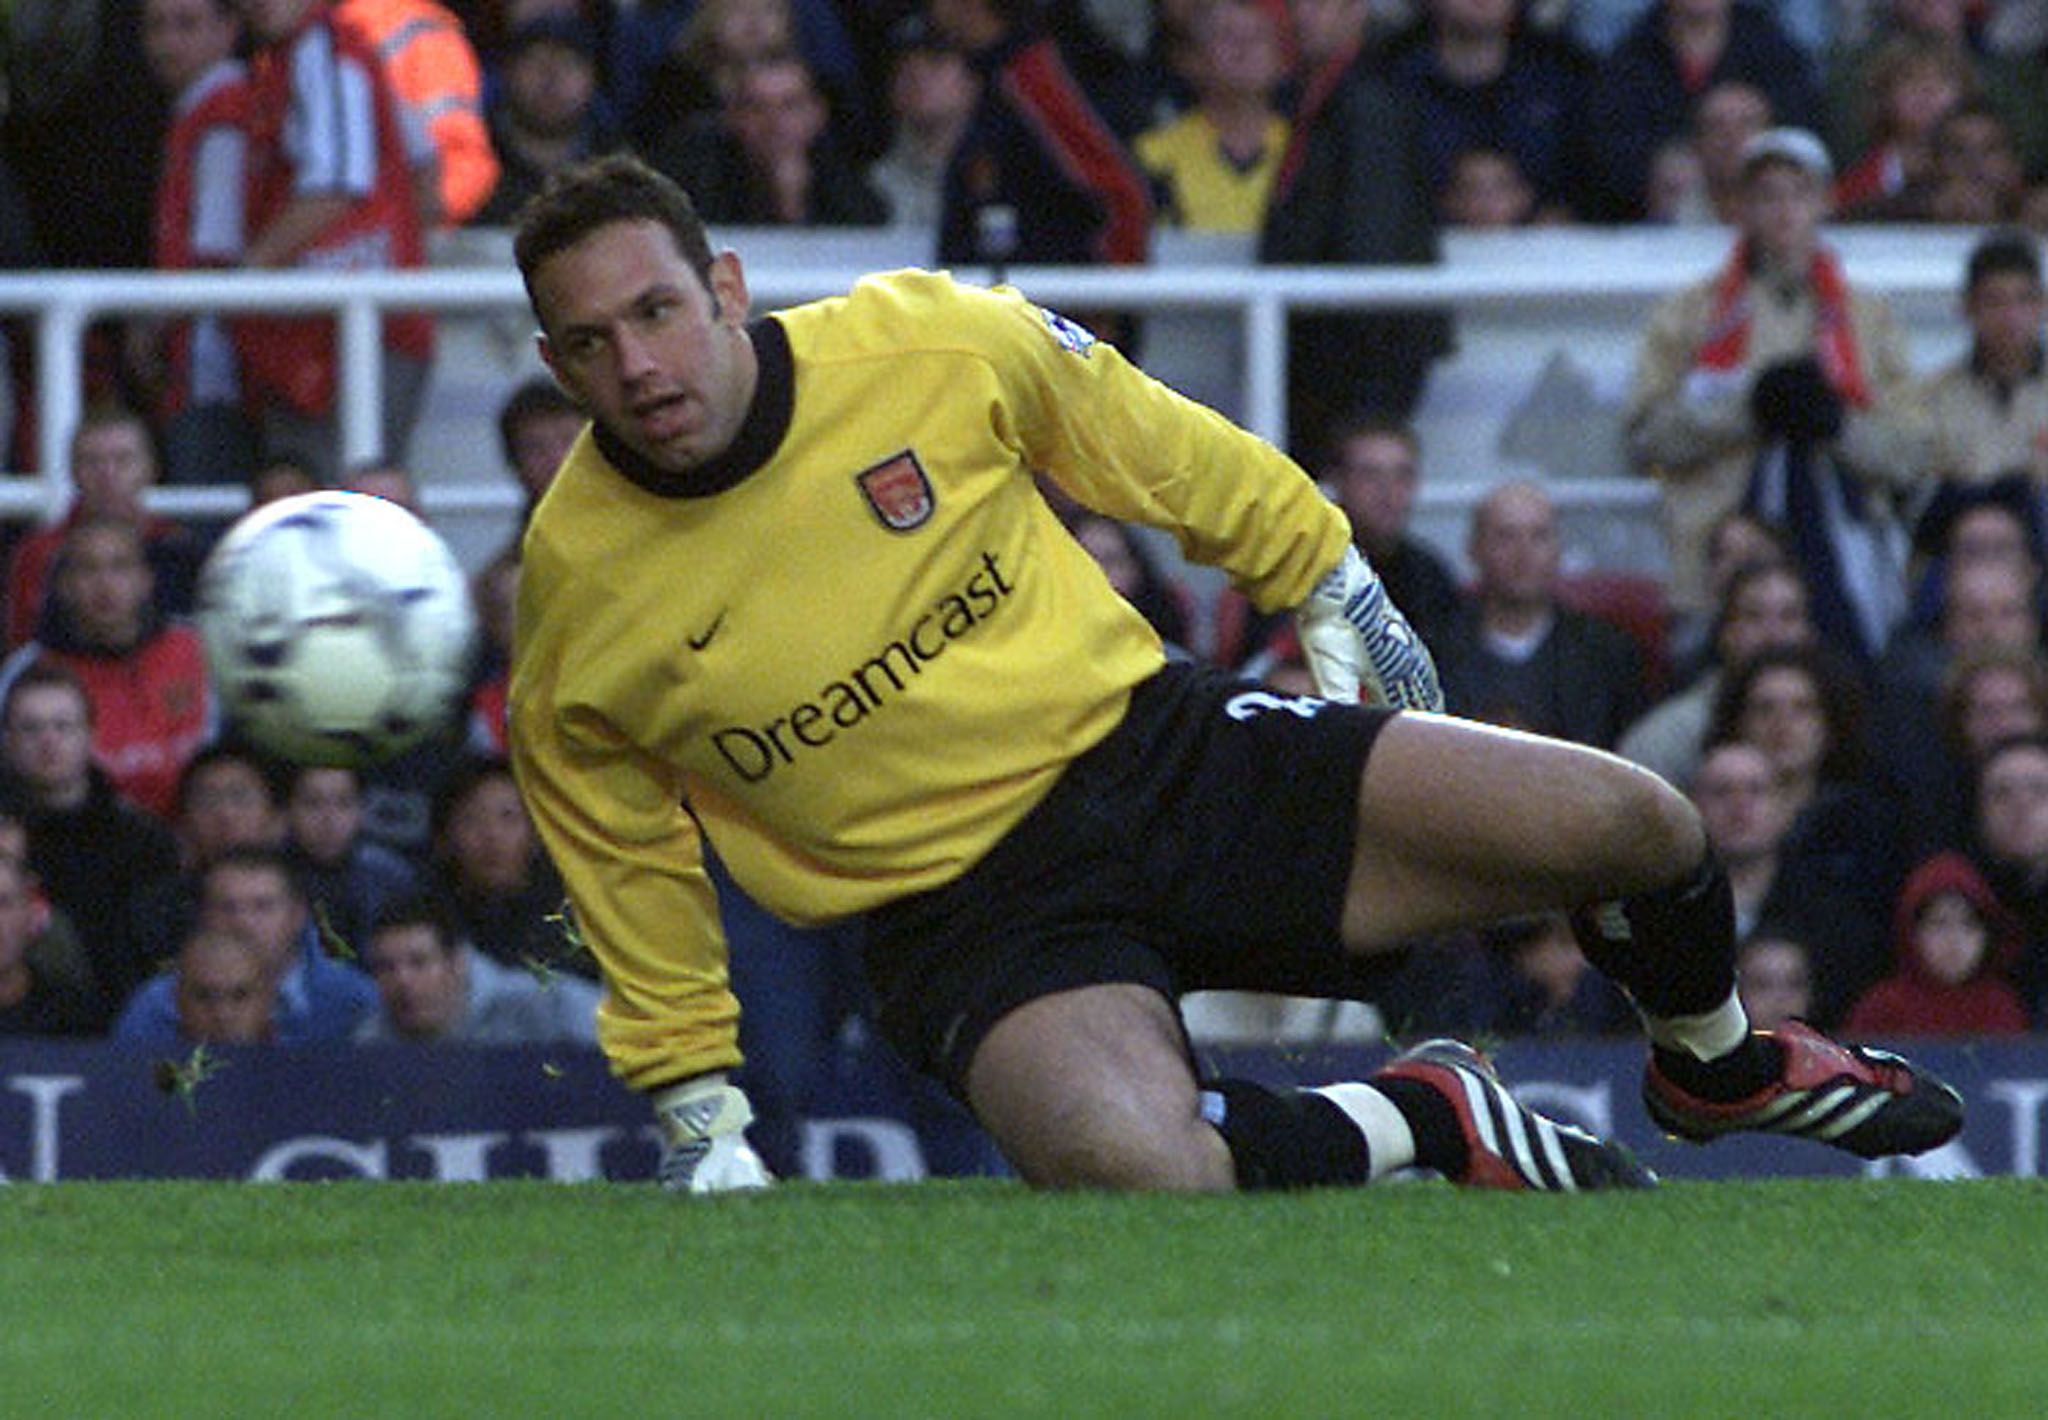 Arsenal's goalkeeper Richard Wright watches the ball bounce past him
during their English Premiere League match against Charlton Athletic at
Highbury November 4, 2001. Arsenal lost the match 4-2. REUTERS/Russell
Boyce 